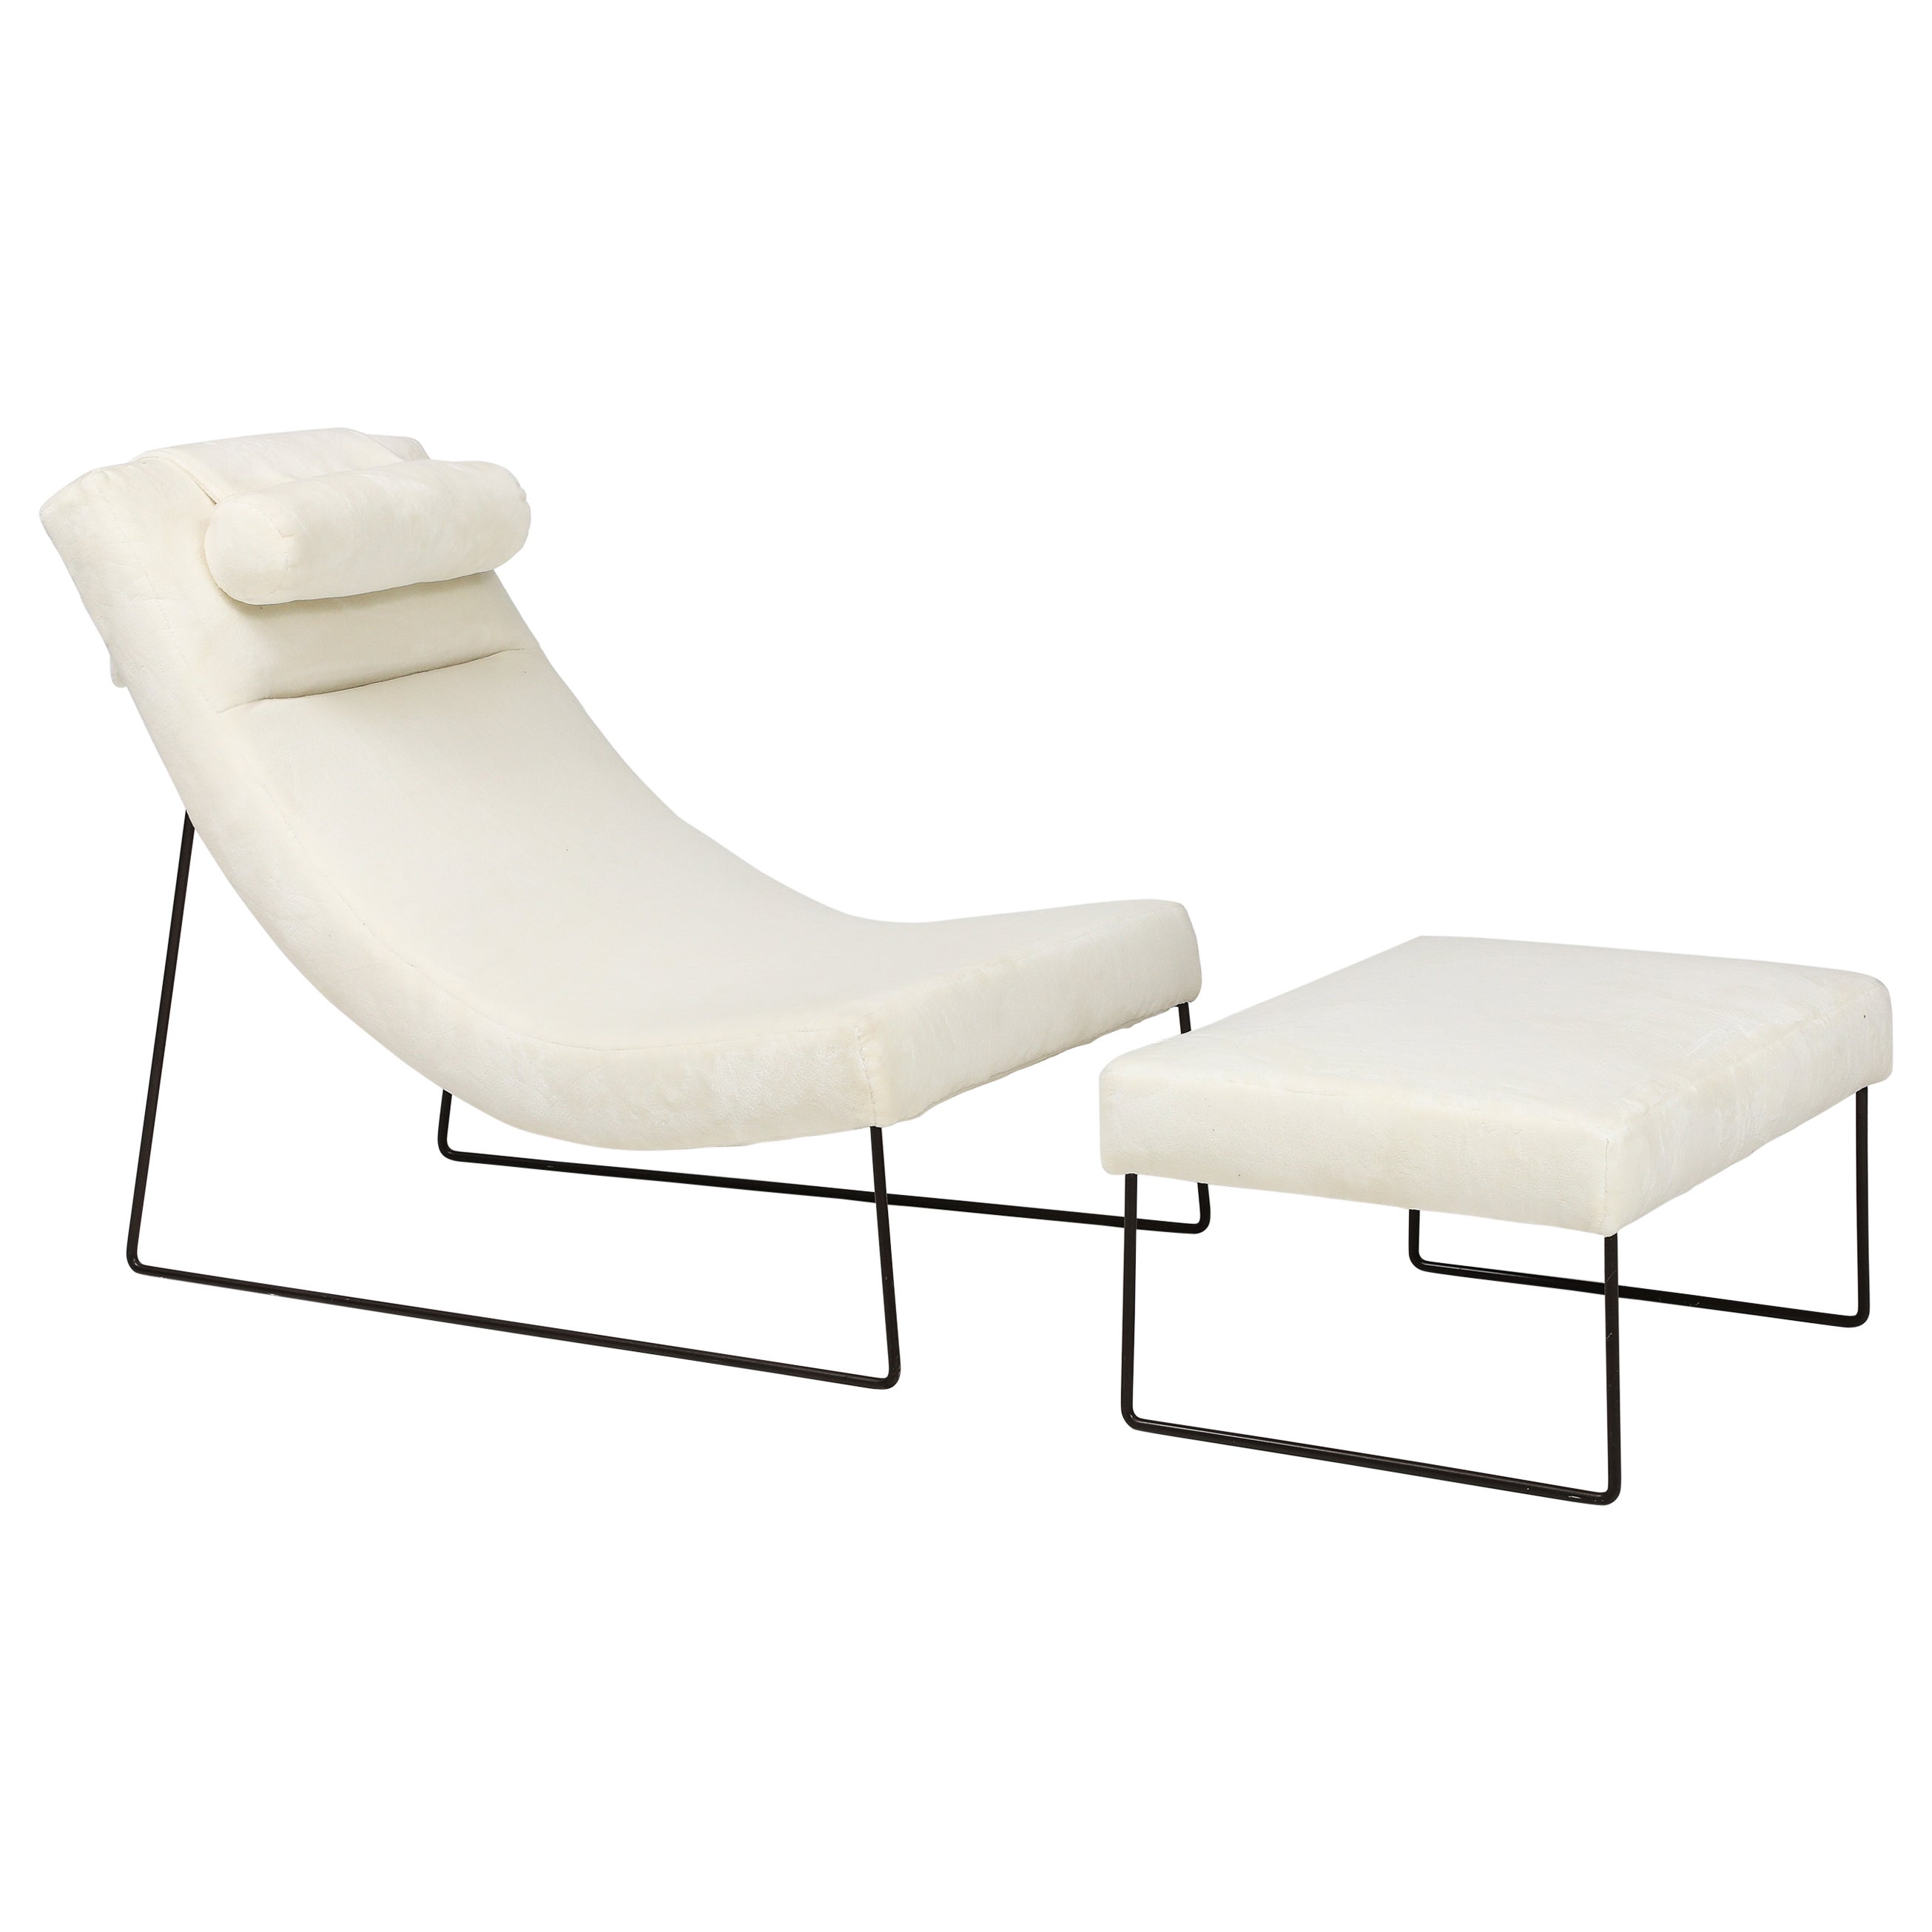 Italian Modernist Wrought Iron Chaise and Ottoman, Italy, circa 1960  For Sale